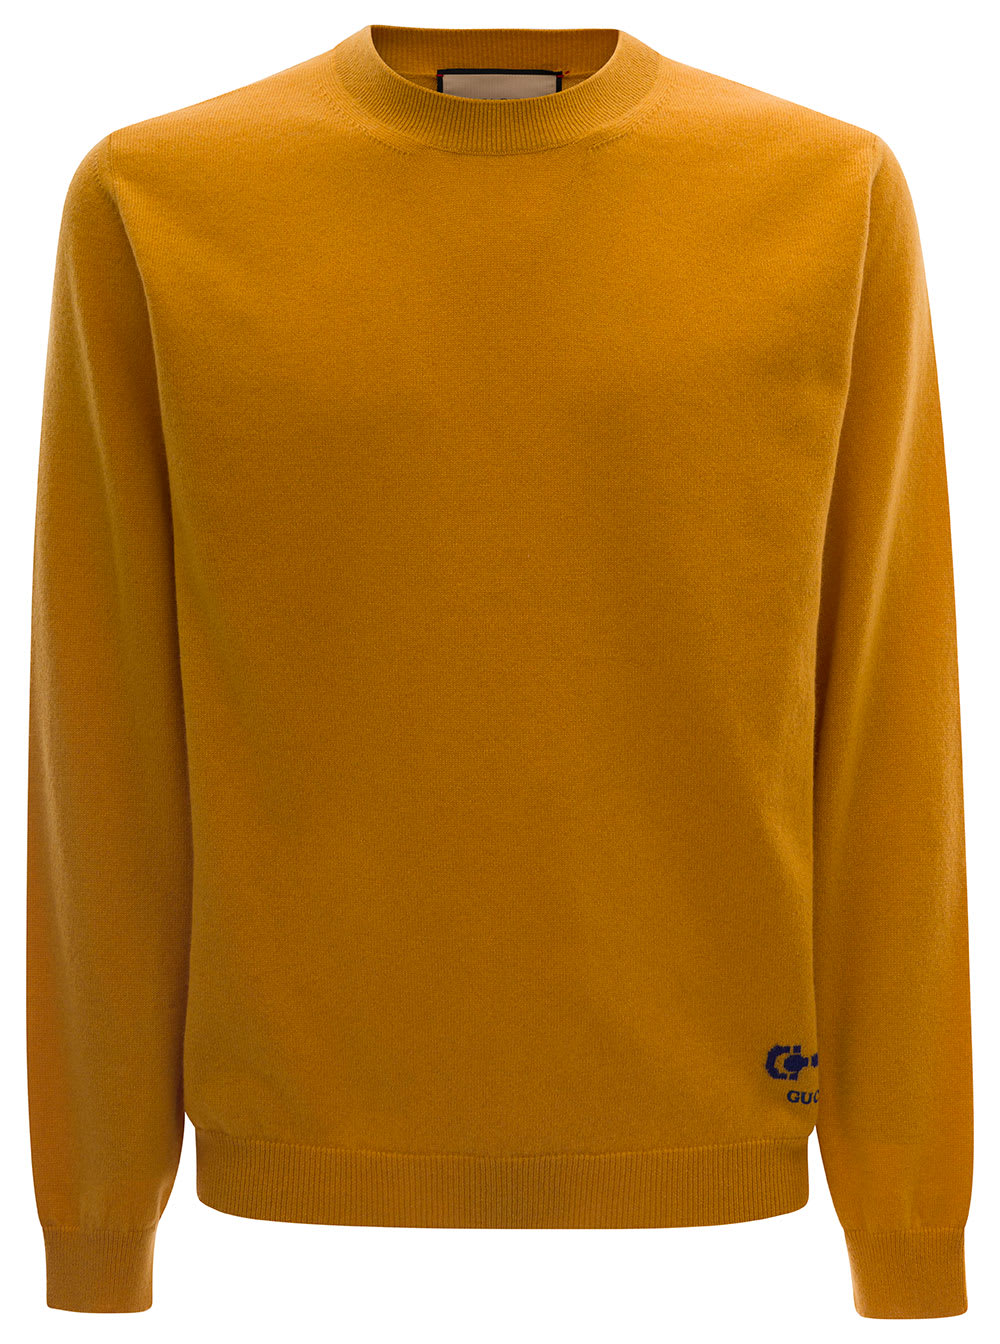 GUCCI YELLOW CREWNECK PULL IN CASHMERE MAN